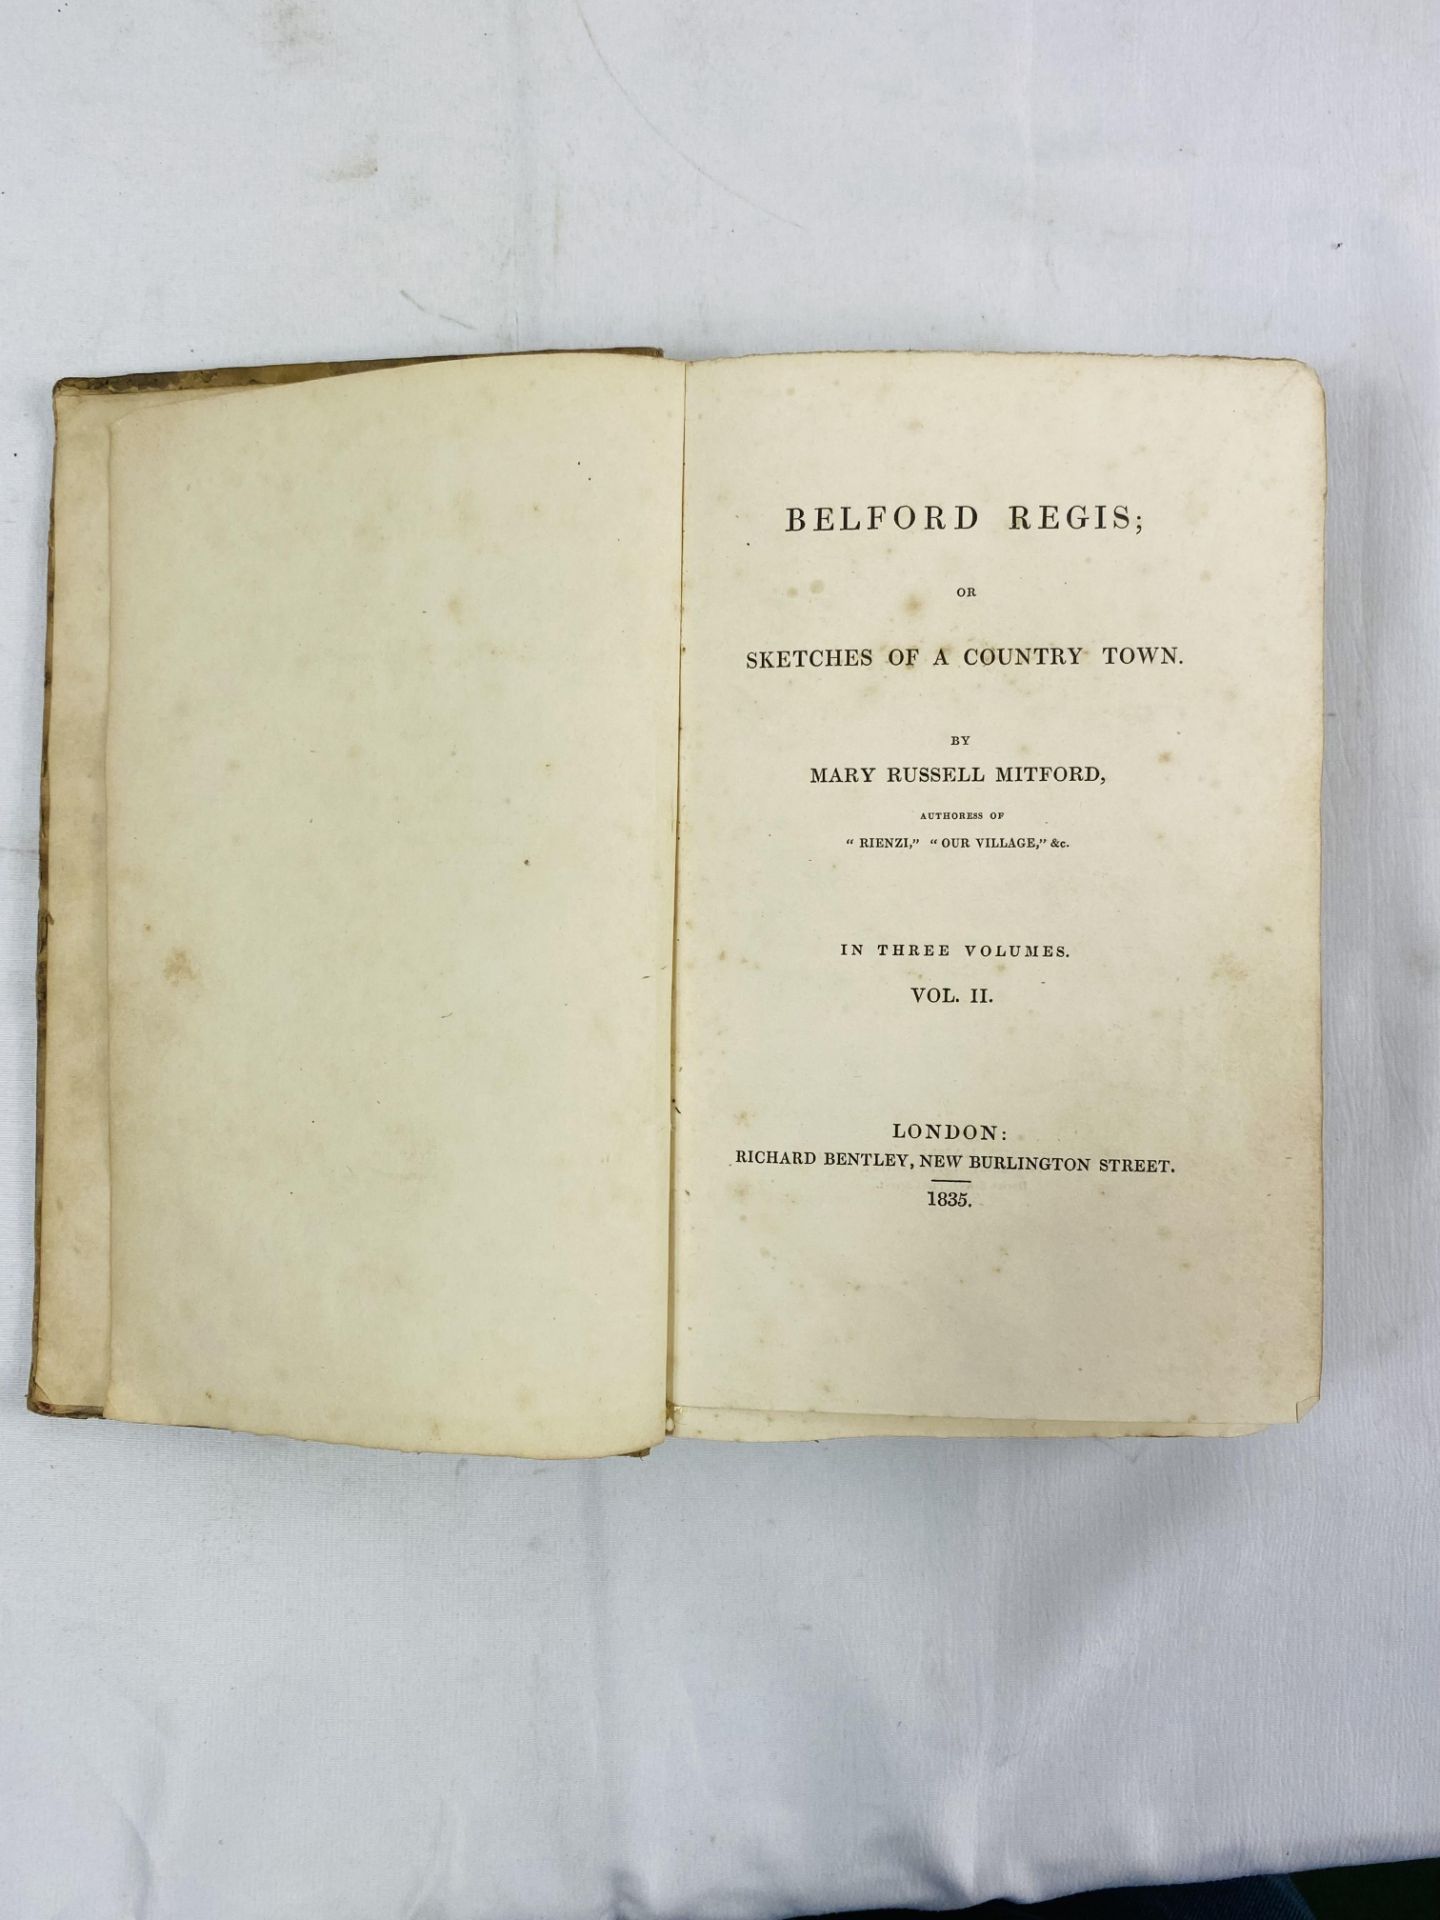 Belford Regis or Sketches of a Country Town by Mary Russell Mitford, 1835 - Image 5 of 7